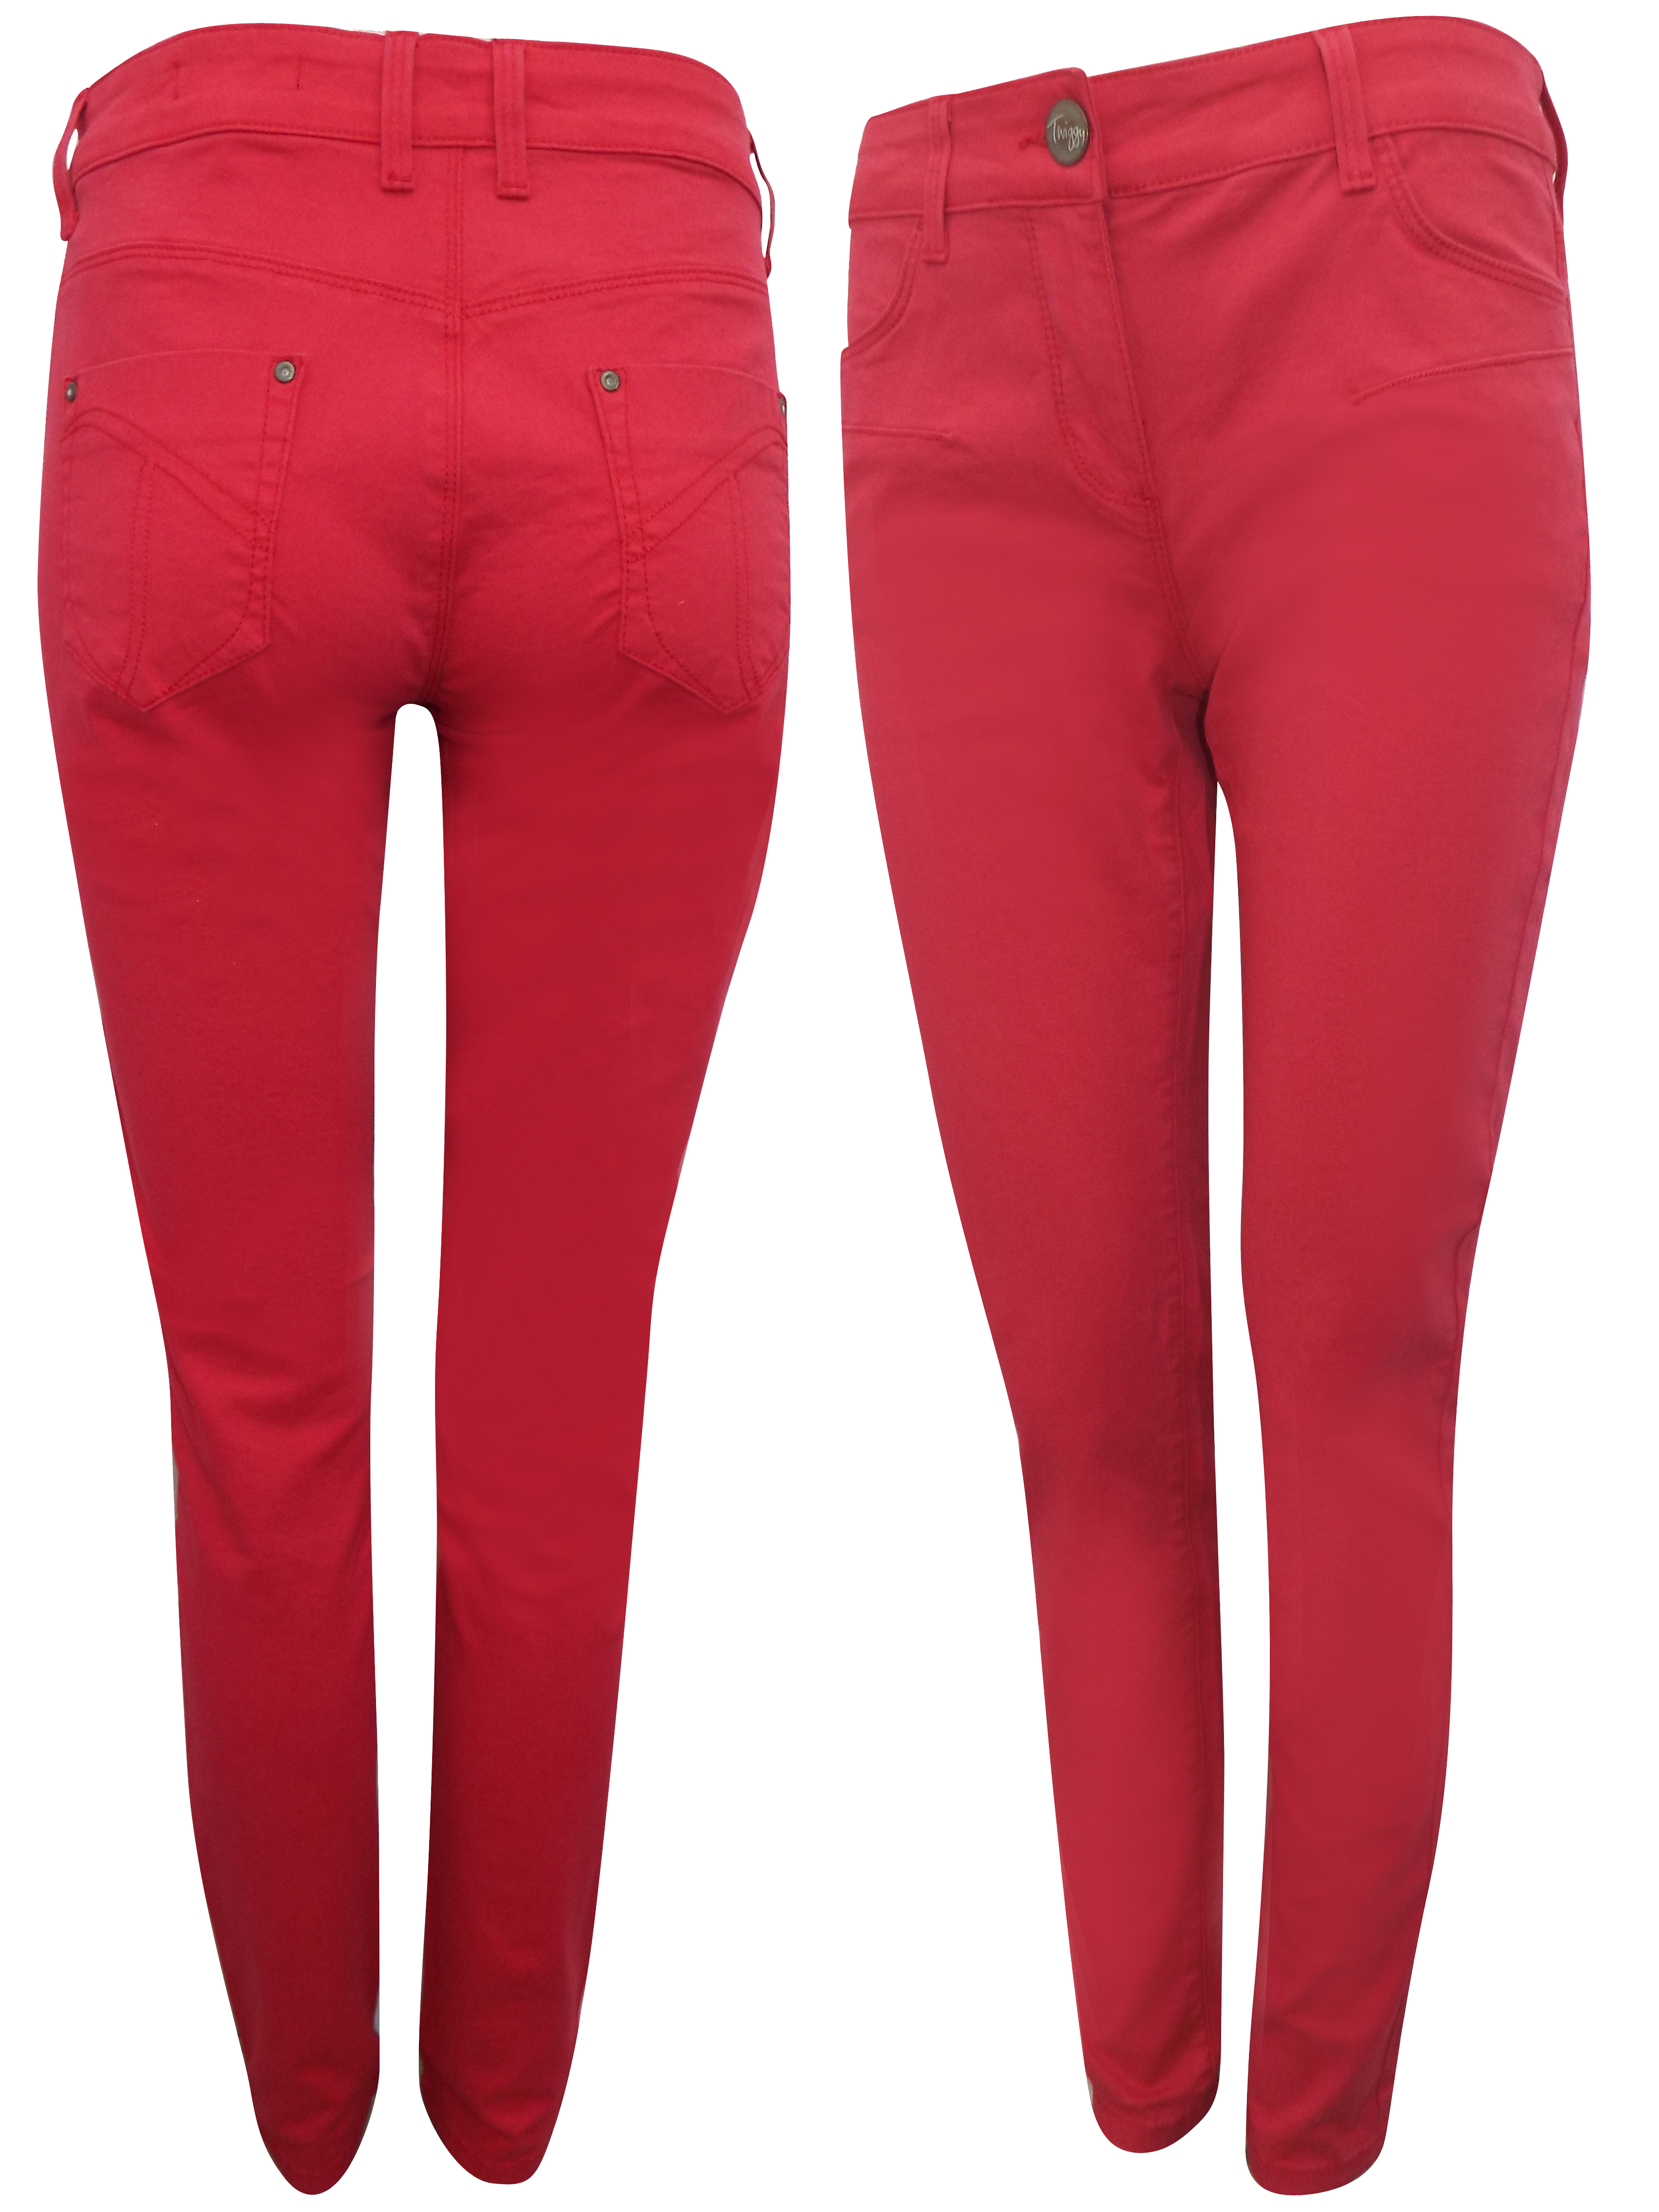 Marks and Spencer - - M&5 LIPSTICK Cotton Rich Skinny Fit Denim Jeans ...